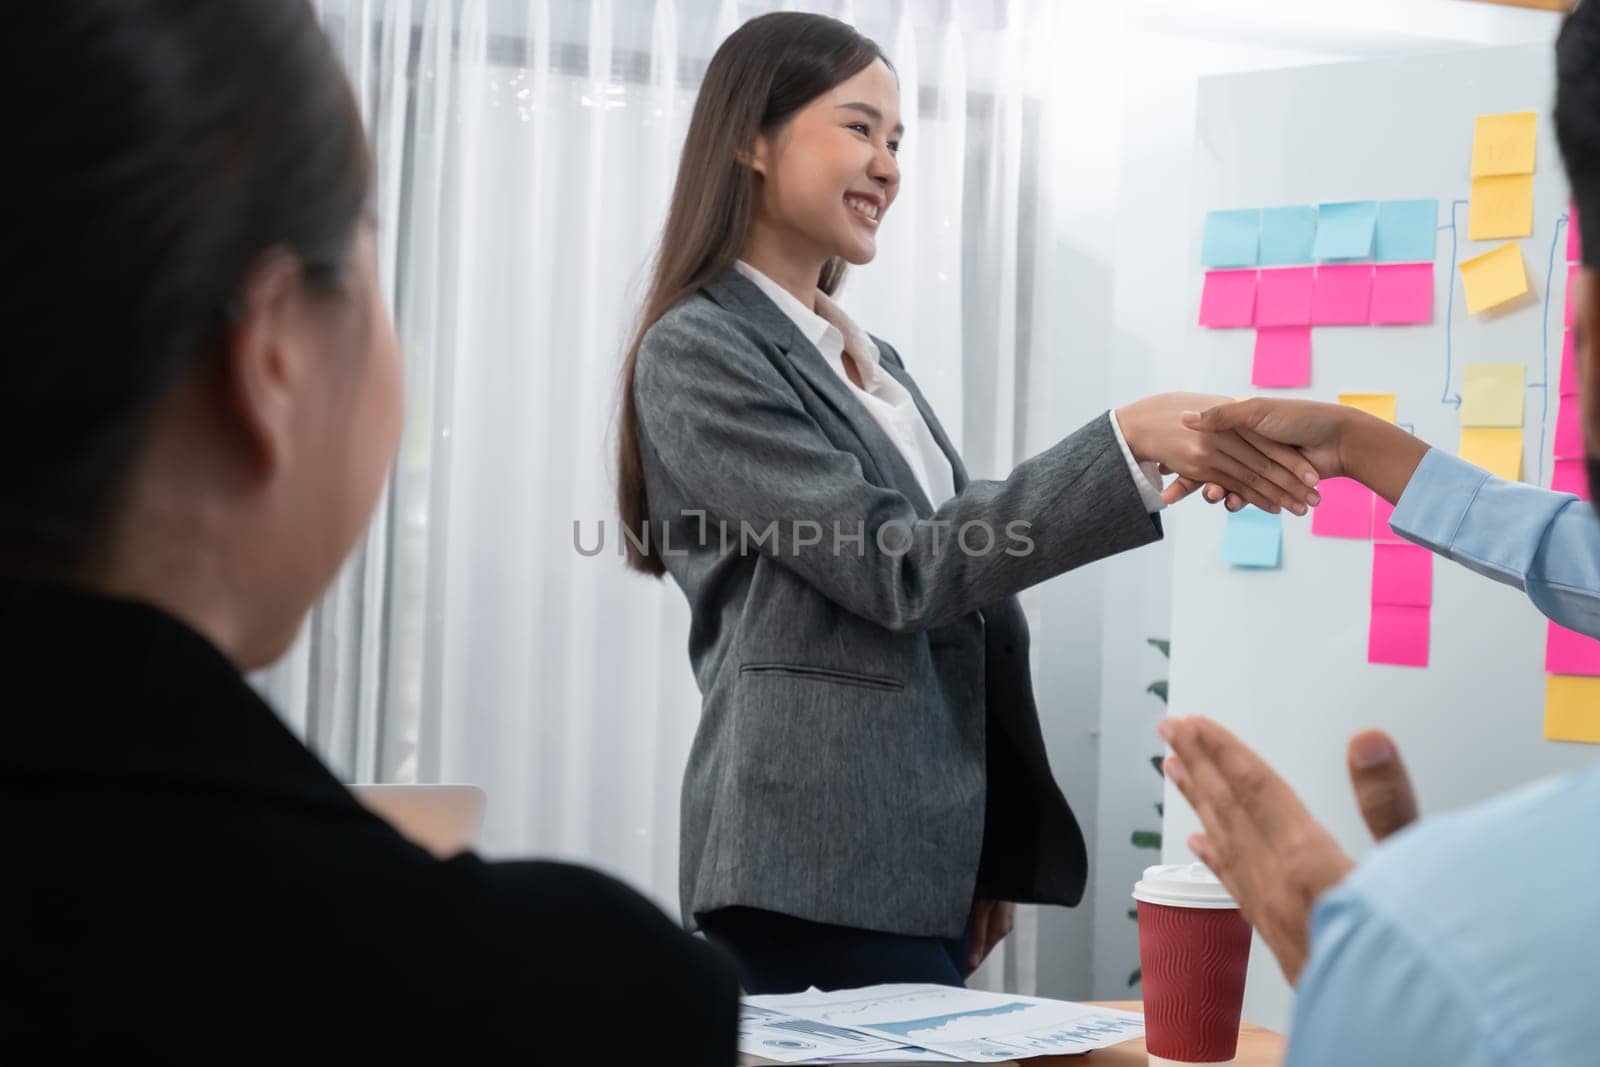 Diverse coworker celebrate with handshake and teamwork in corporate workplace. Happy business people united by handshaking after successful meeting or business presentation on data analysis. Concord